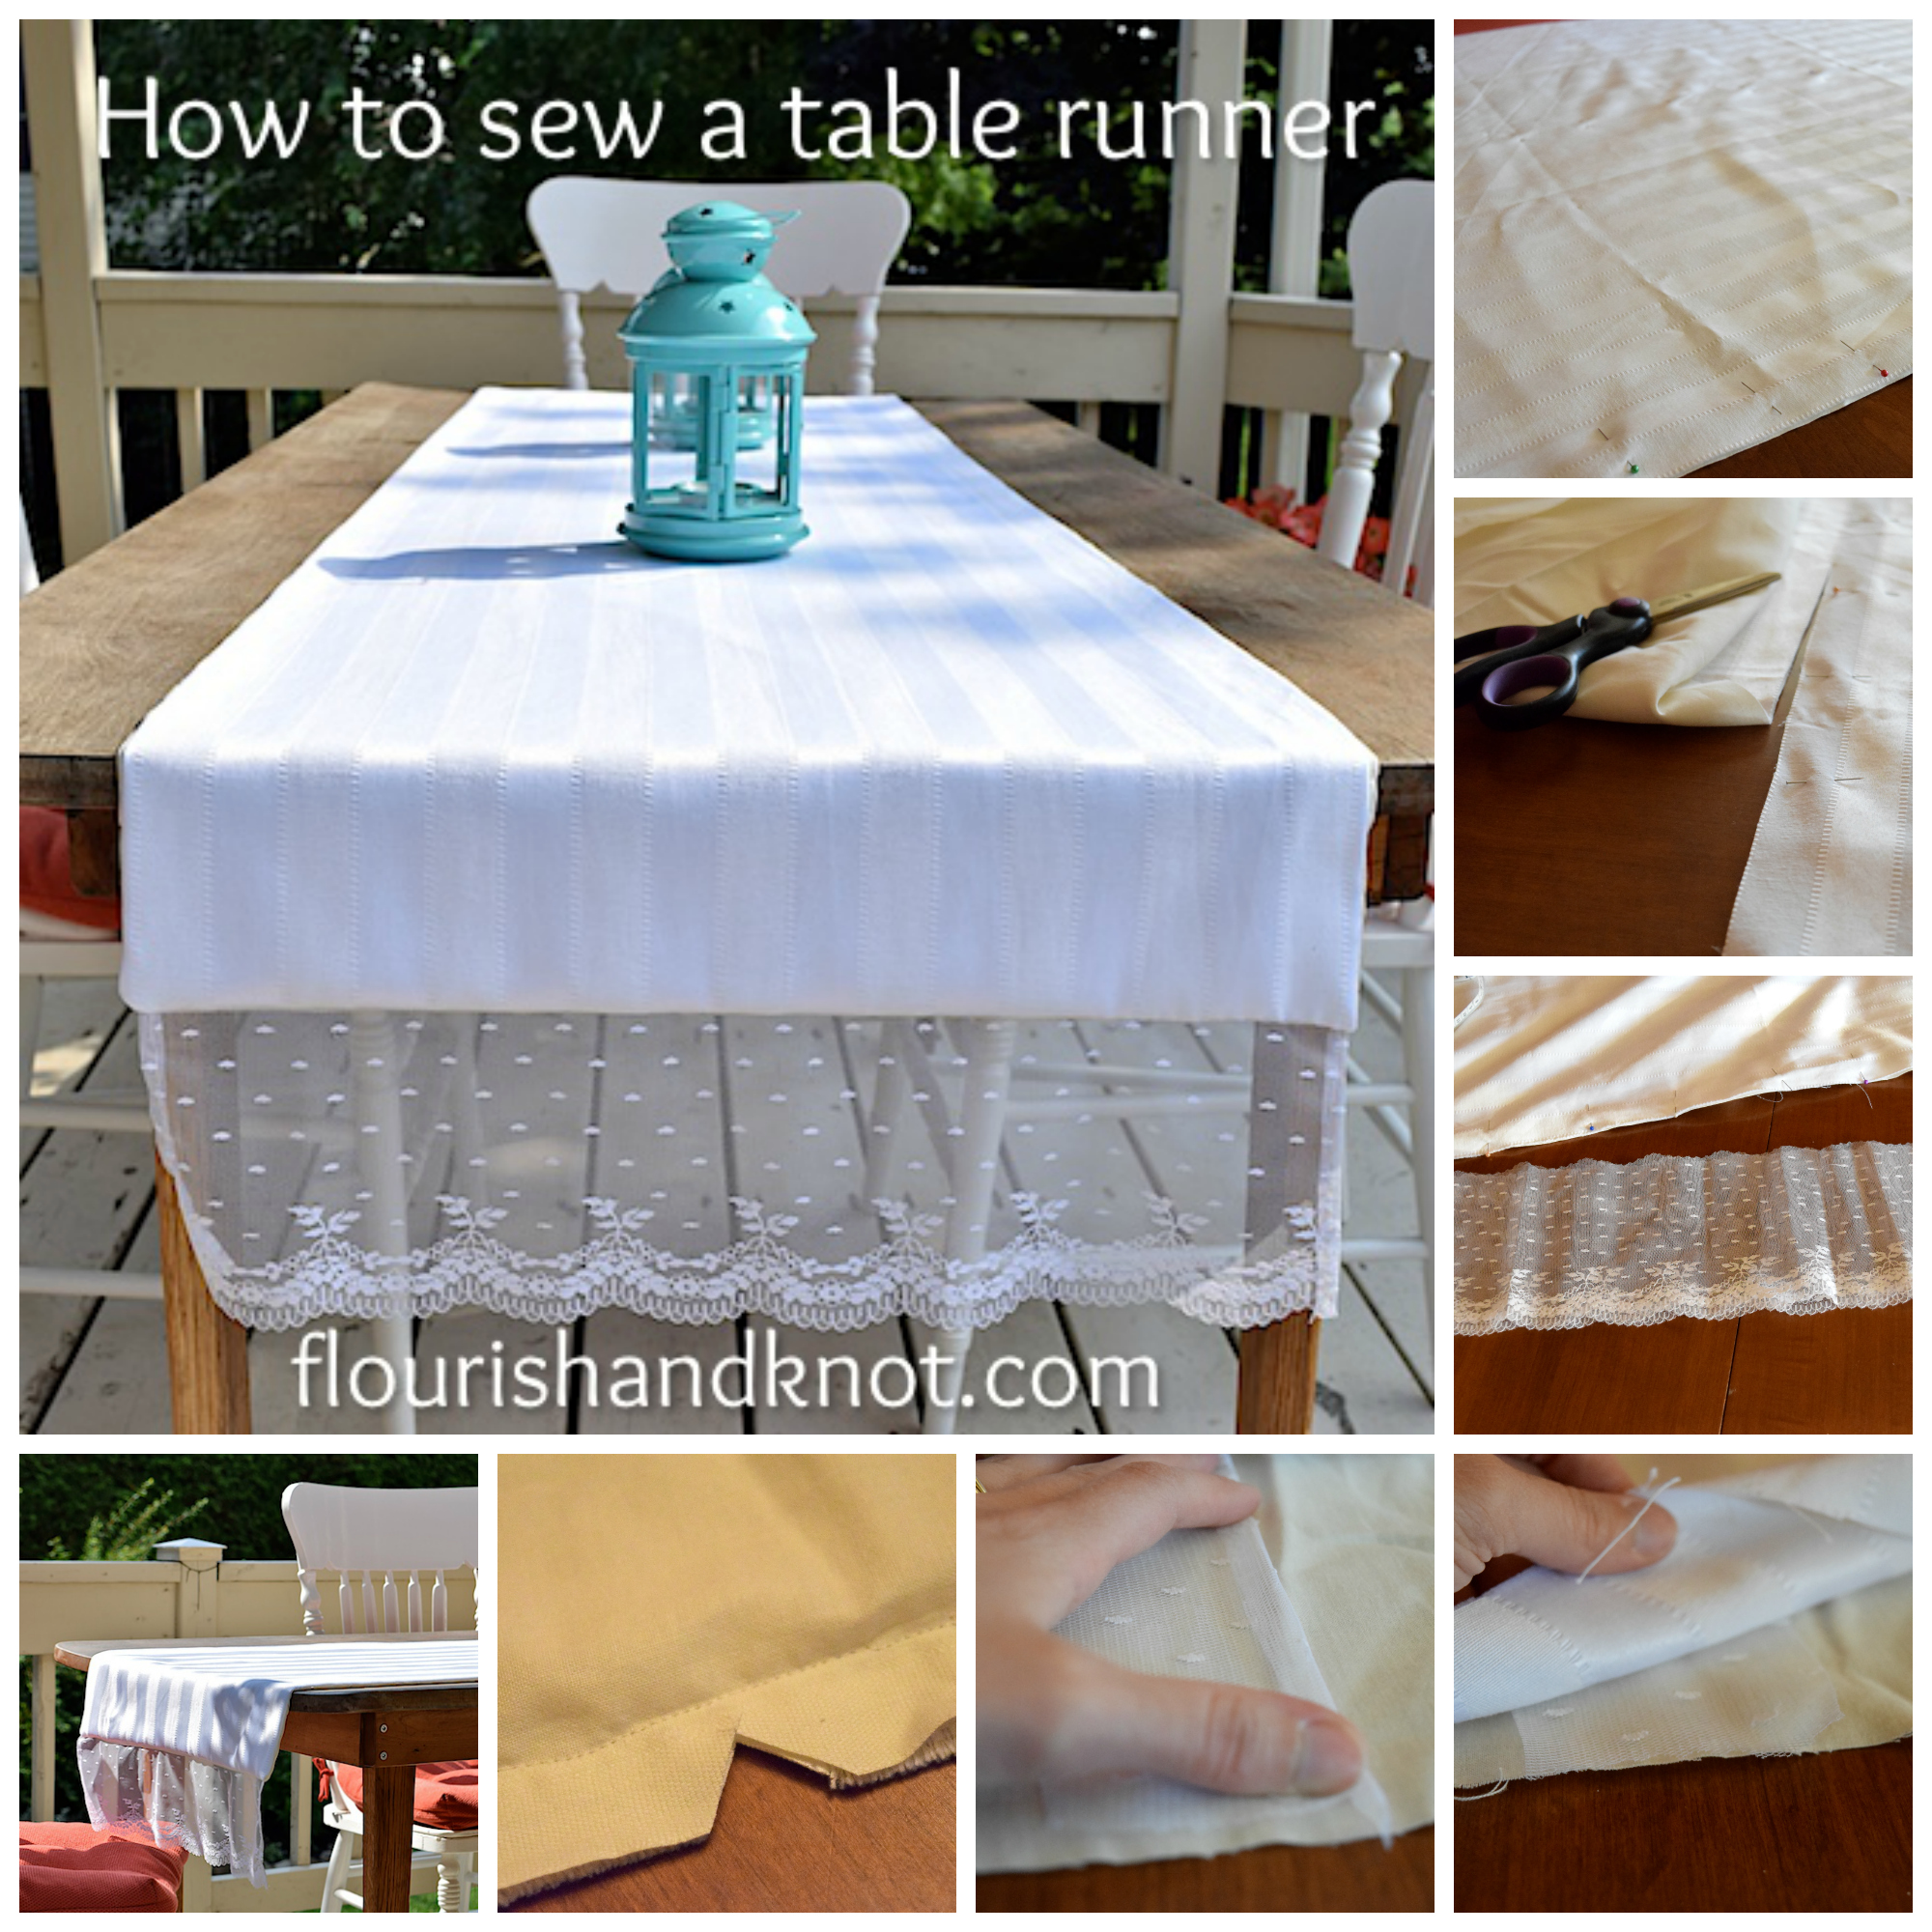 How to sew a simple table runner | flourishandknot.com